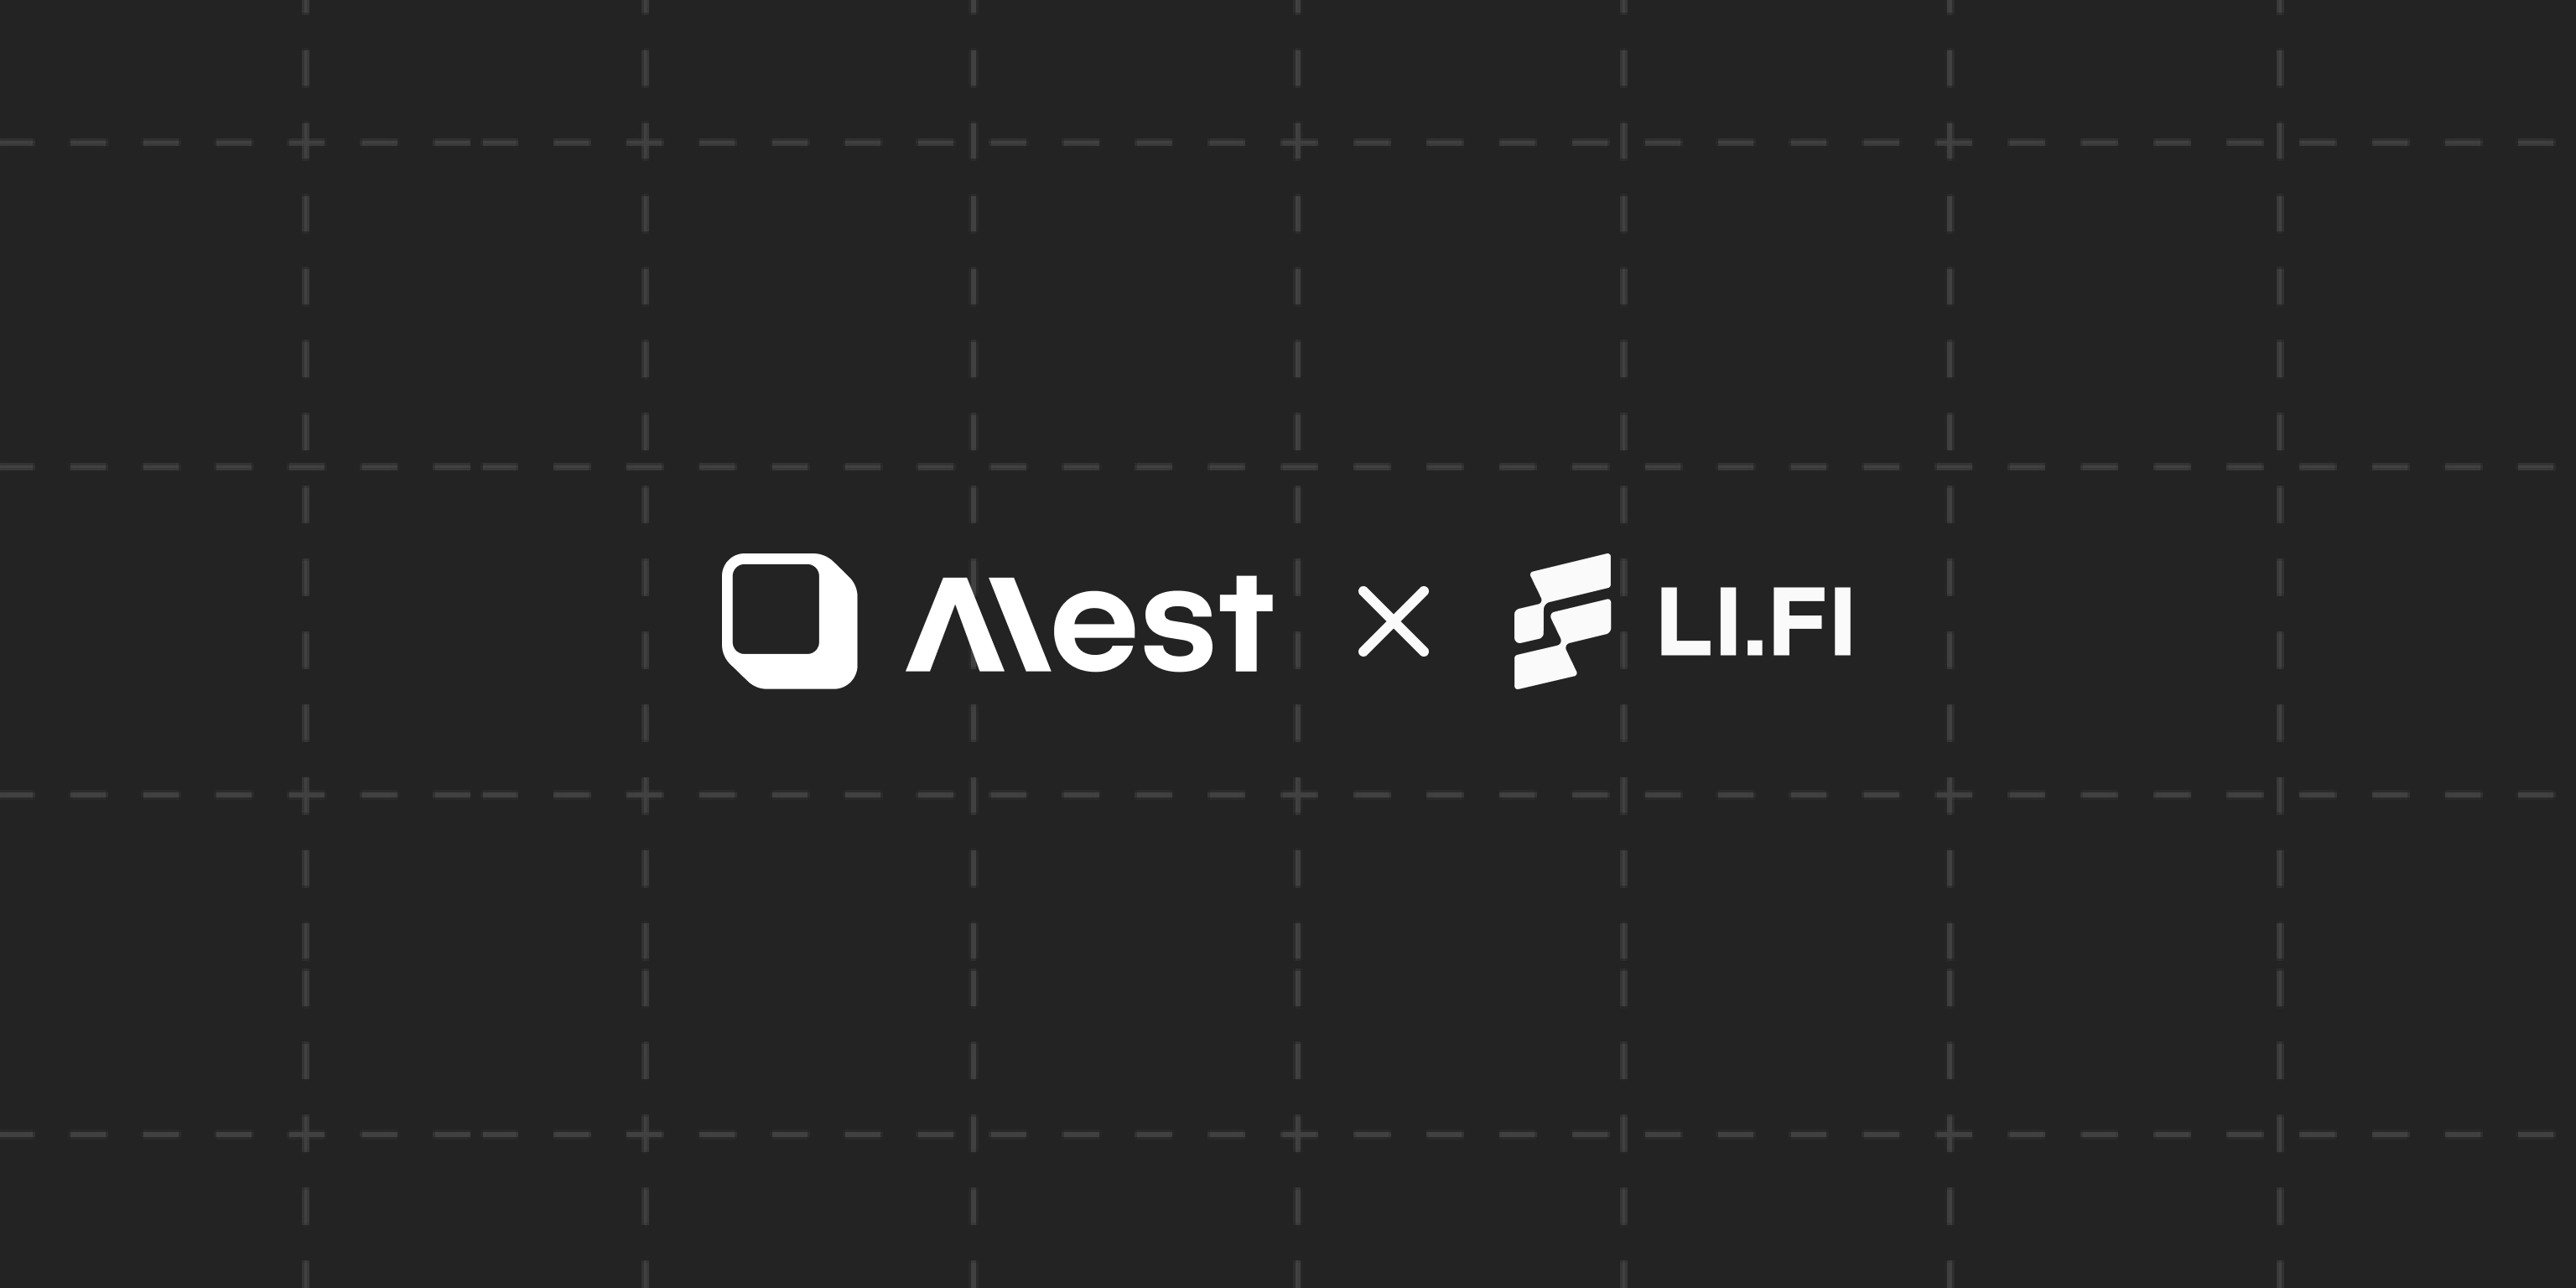 Introducing Cross-Chain Swap on Mest, Powered by LIFI